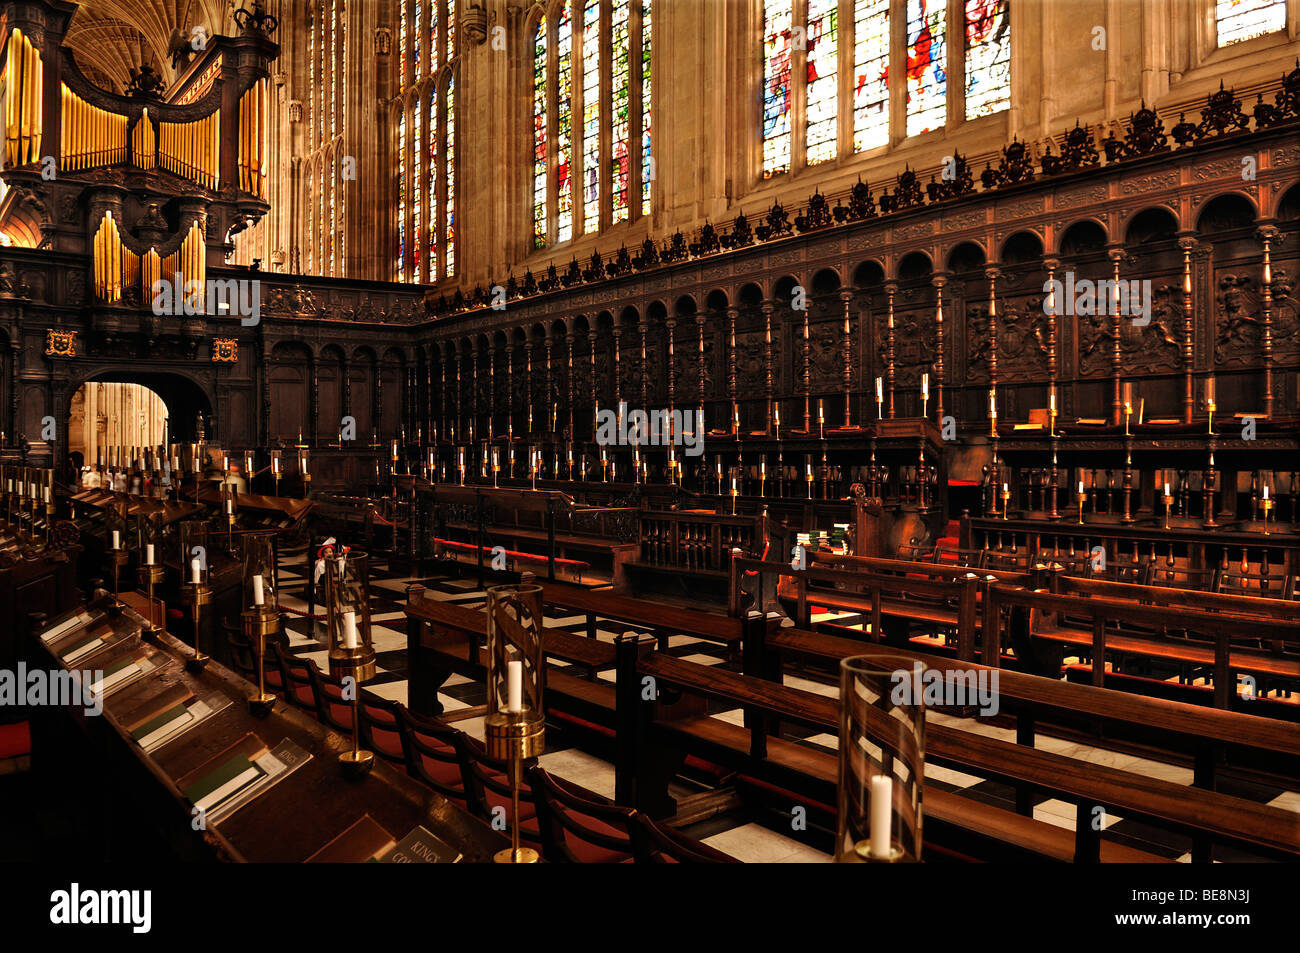 Choir stalls with organ of the 'King's College Chapel', founded in 1441 by King Henry VI., King's Parade, Cambridge, Cambridges Stock Photo